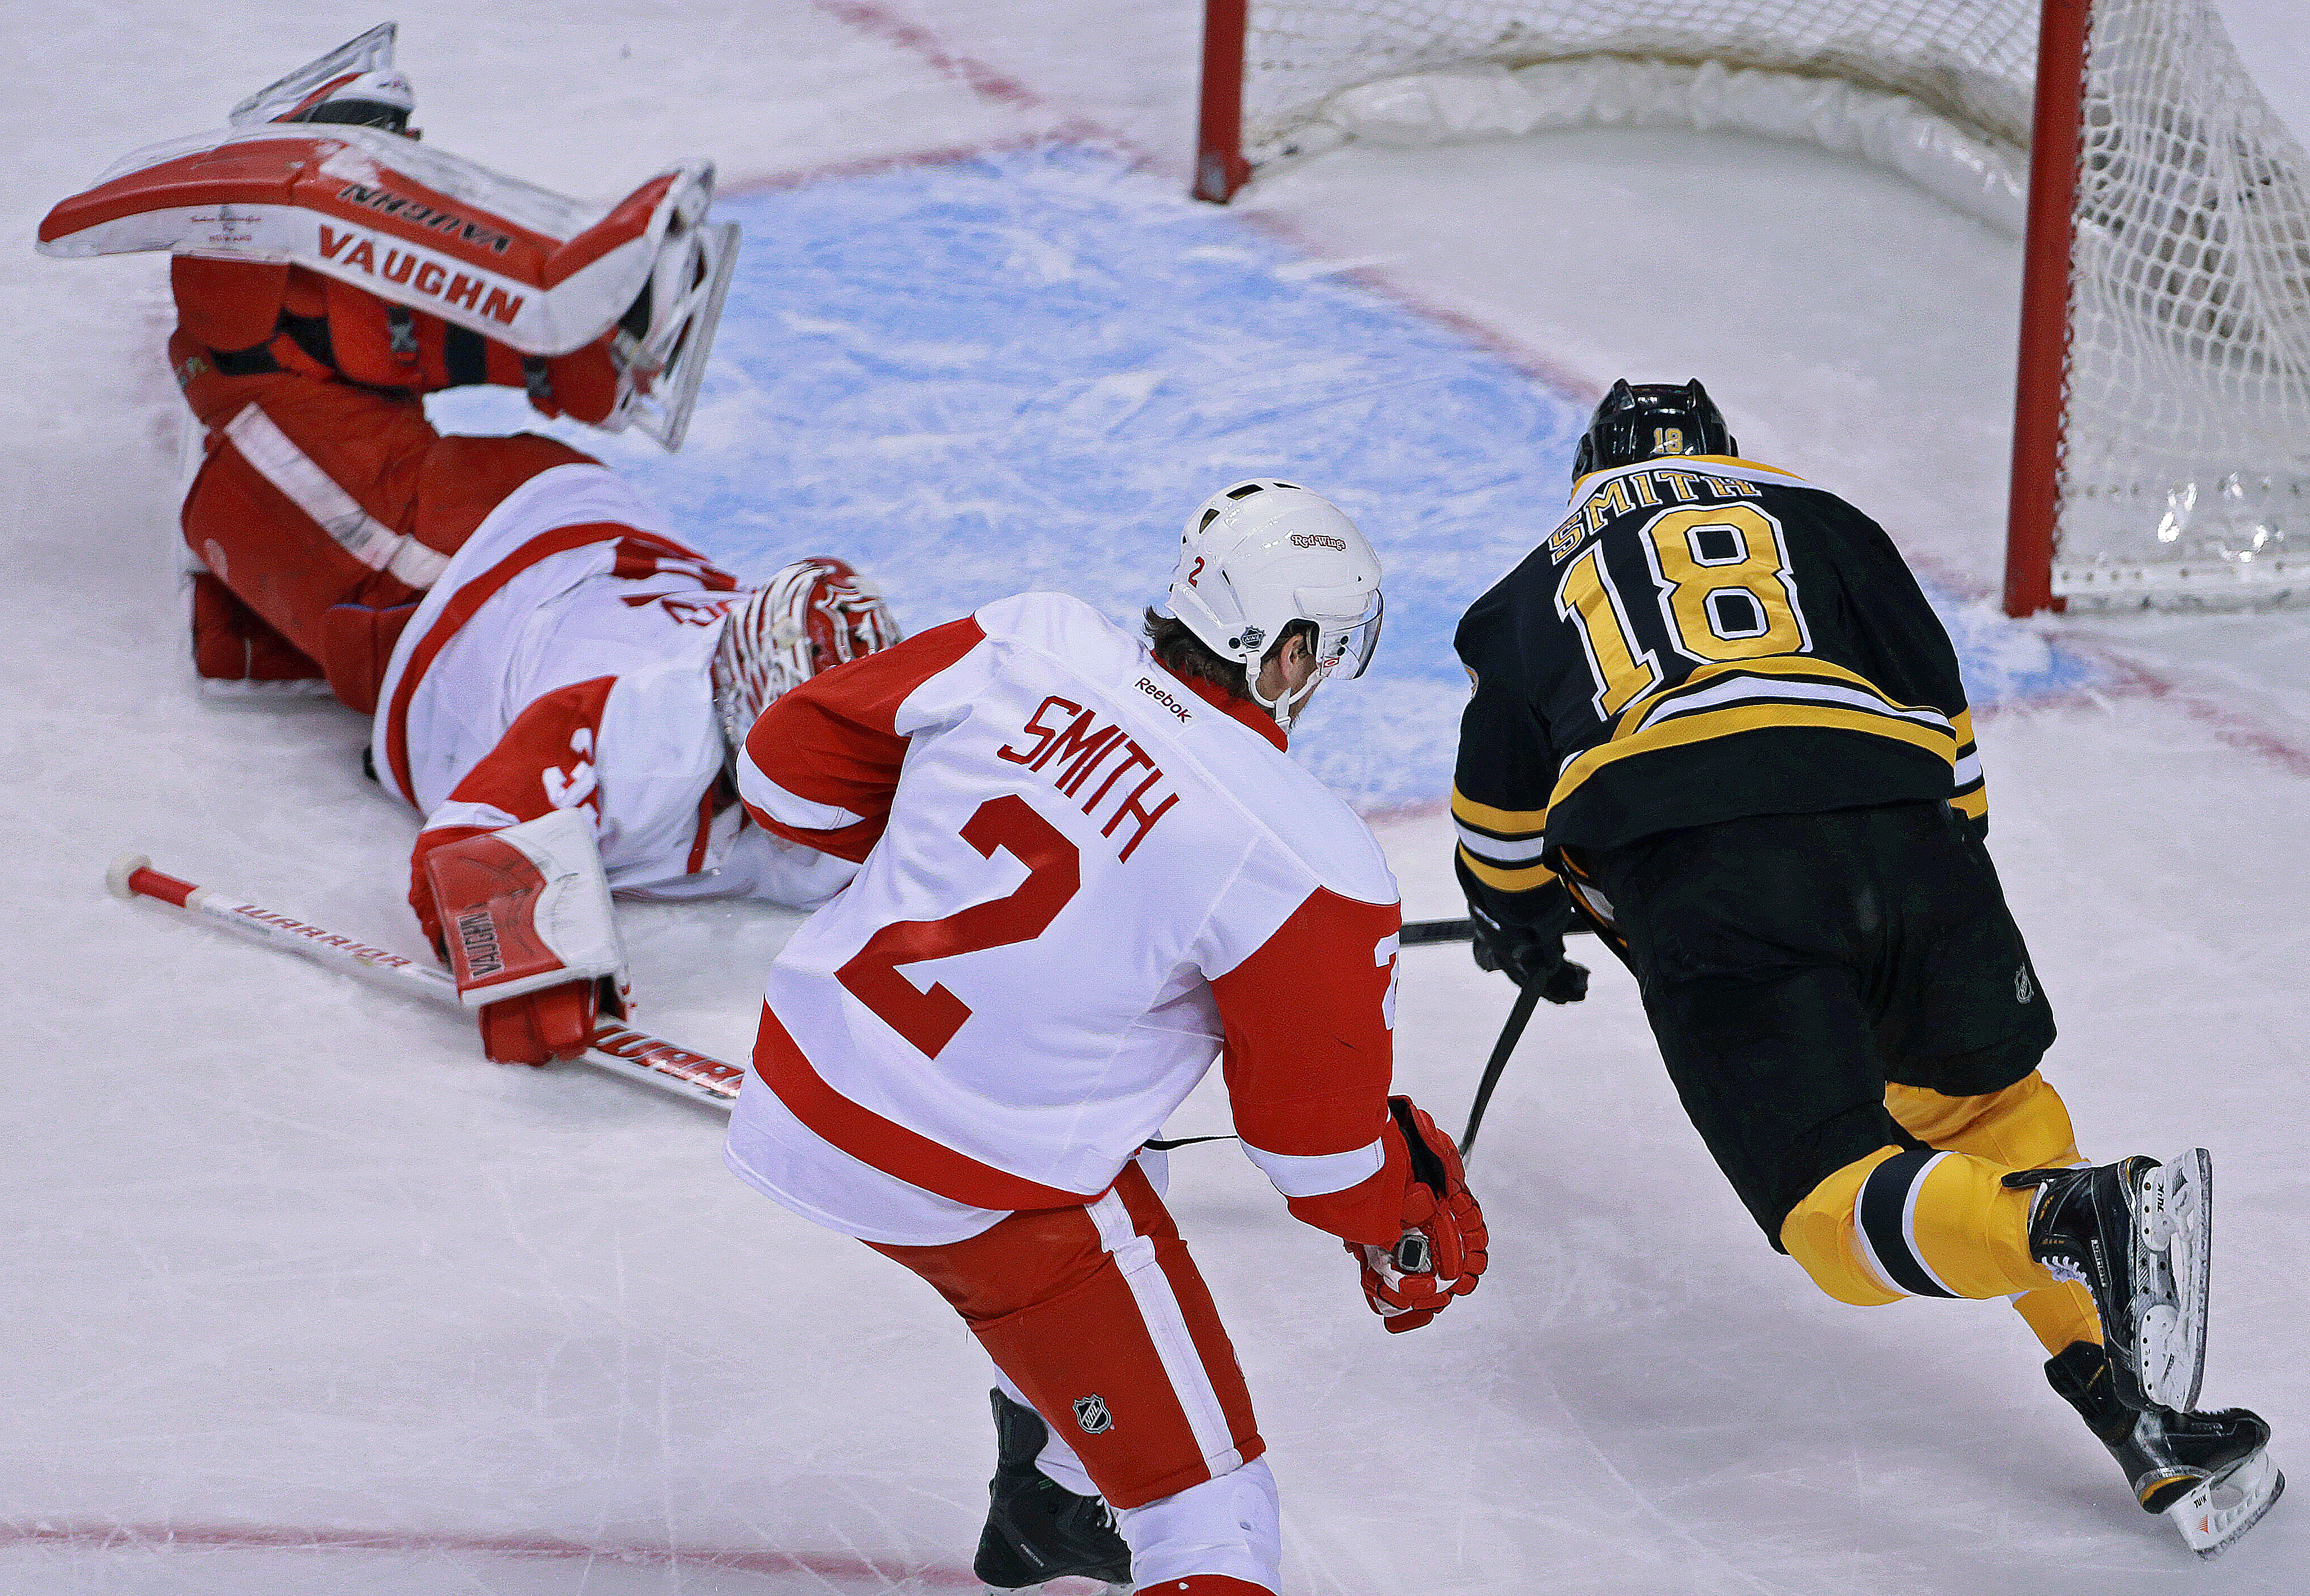 BOSTON - DECEMBER 29: Red Wings goalie Jimmy Howard dives out to stop a first period scoring bid by the Bruins Reilly Smith. right, with Smith's brother Brendan, center, helping out on defense. The Boston Bruins hosted the Detroit Red Wings in a regular season NHL game at the TD Garden. (Photo by Jim Davis/The Boston Globe via Getty Images)